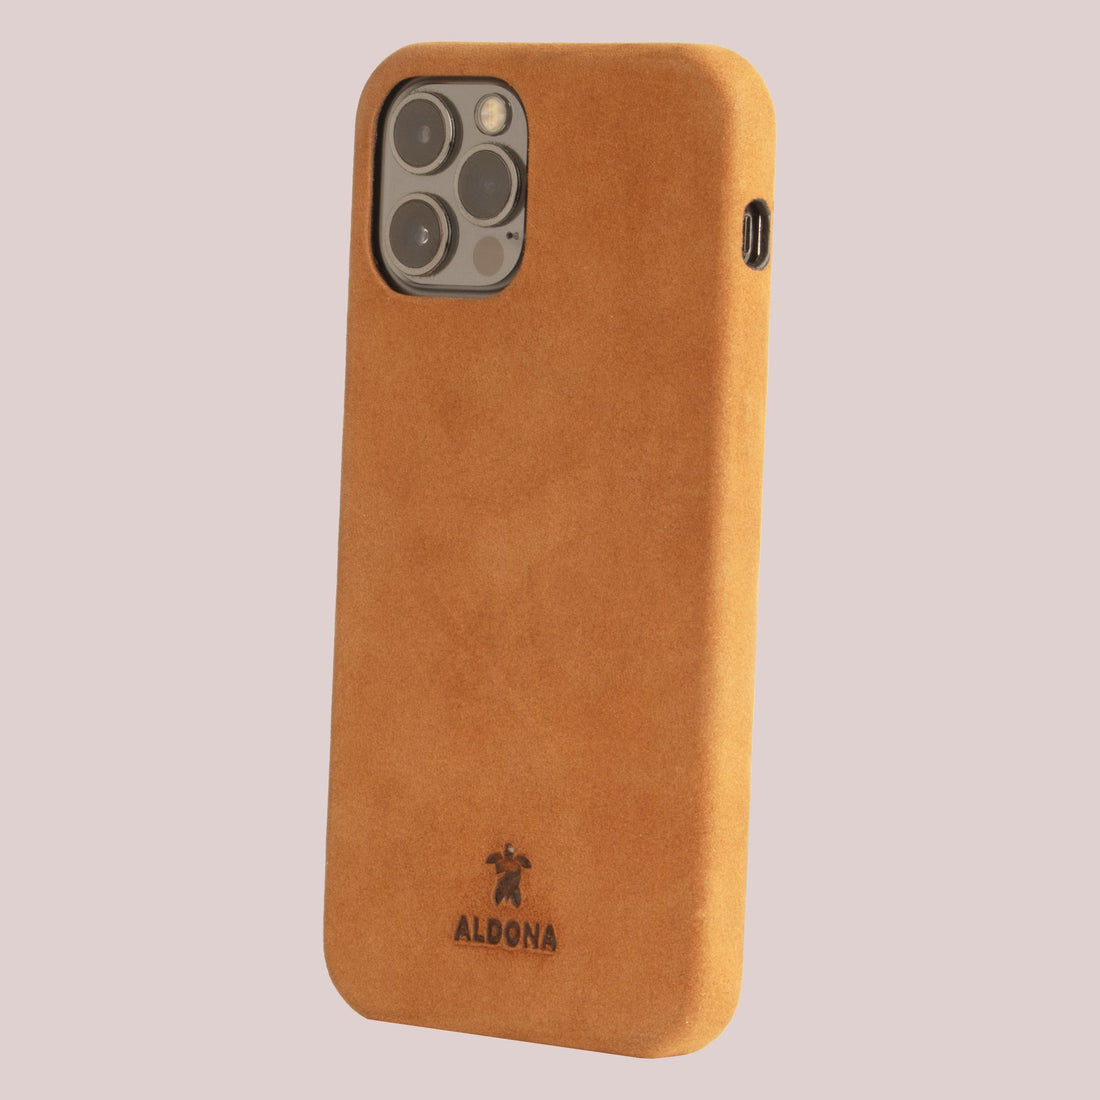 Kalon Case for iPhone 13 with MagSafe Compatibility - Burnt Tobacco